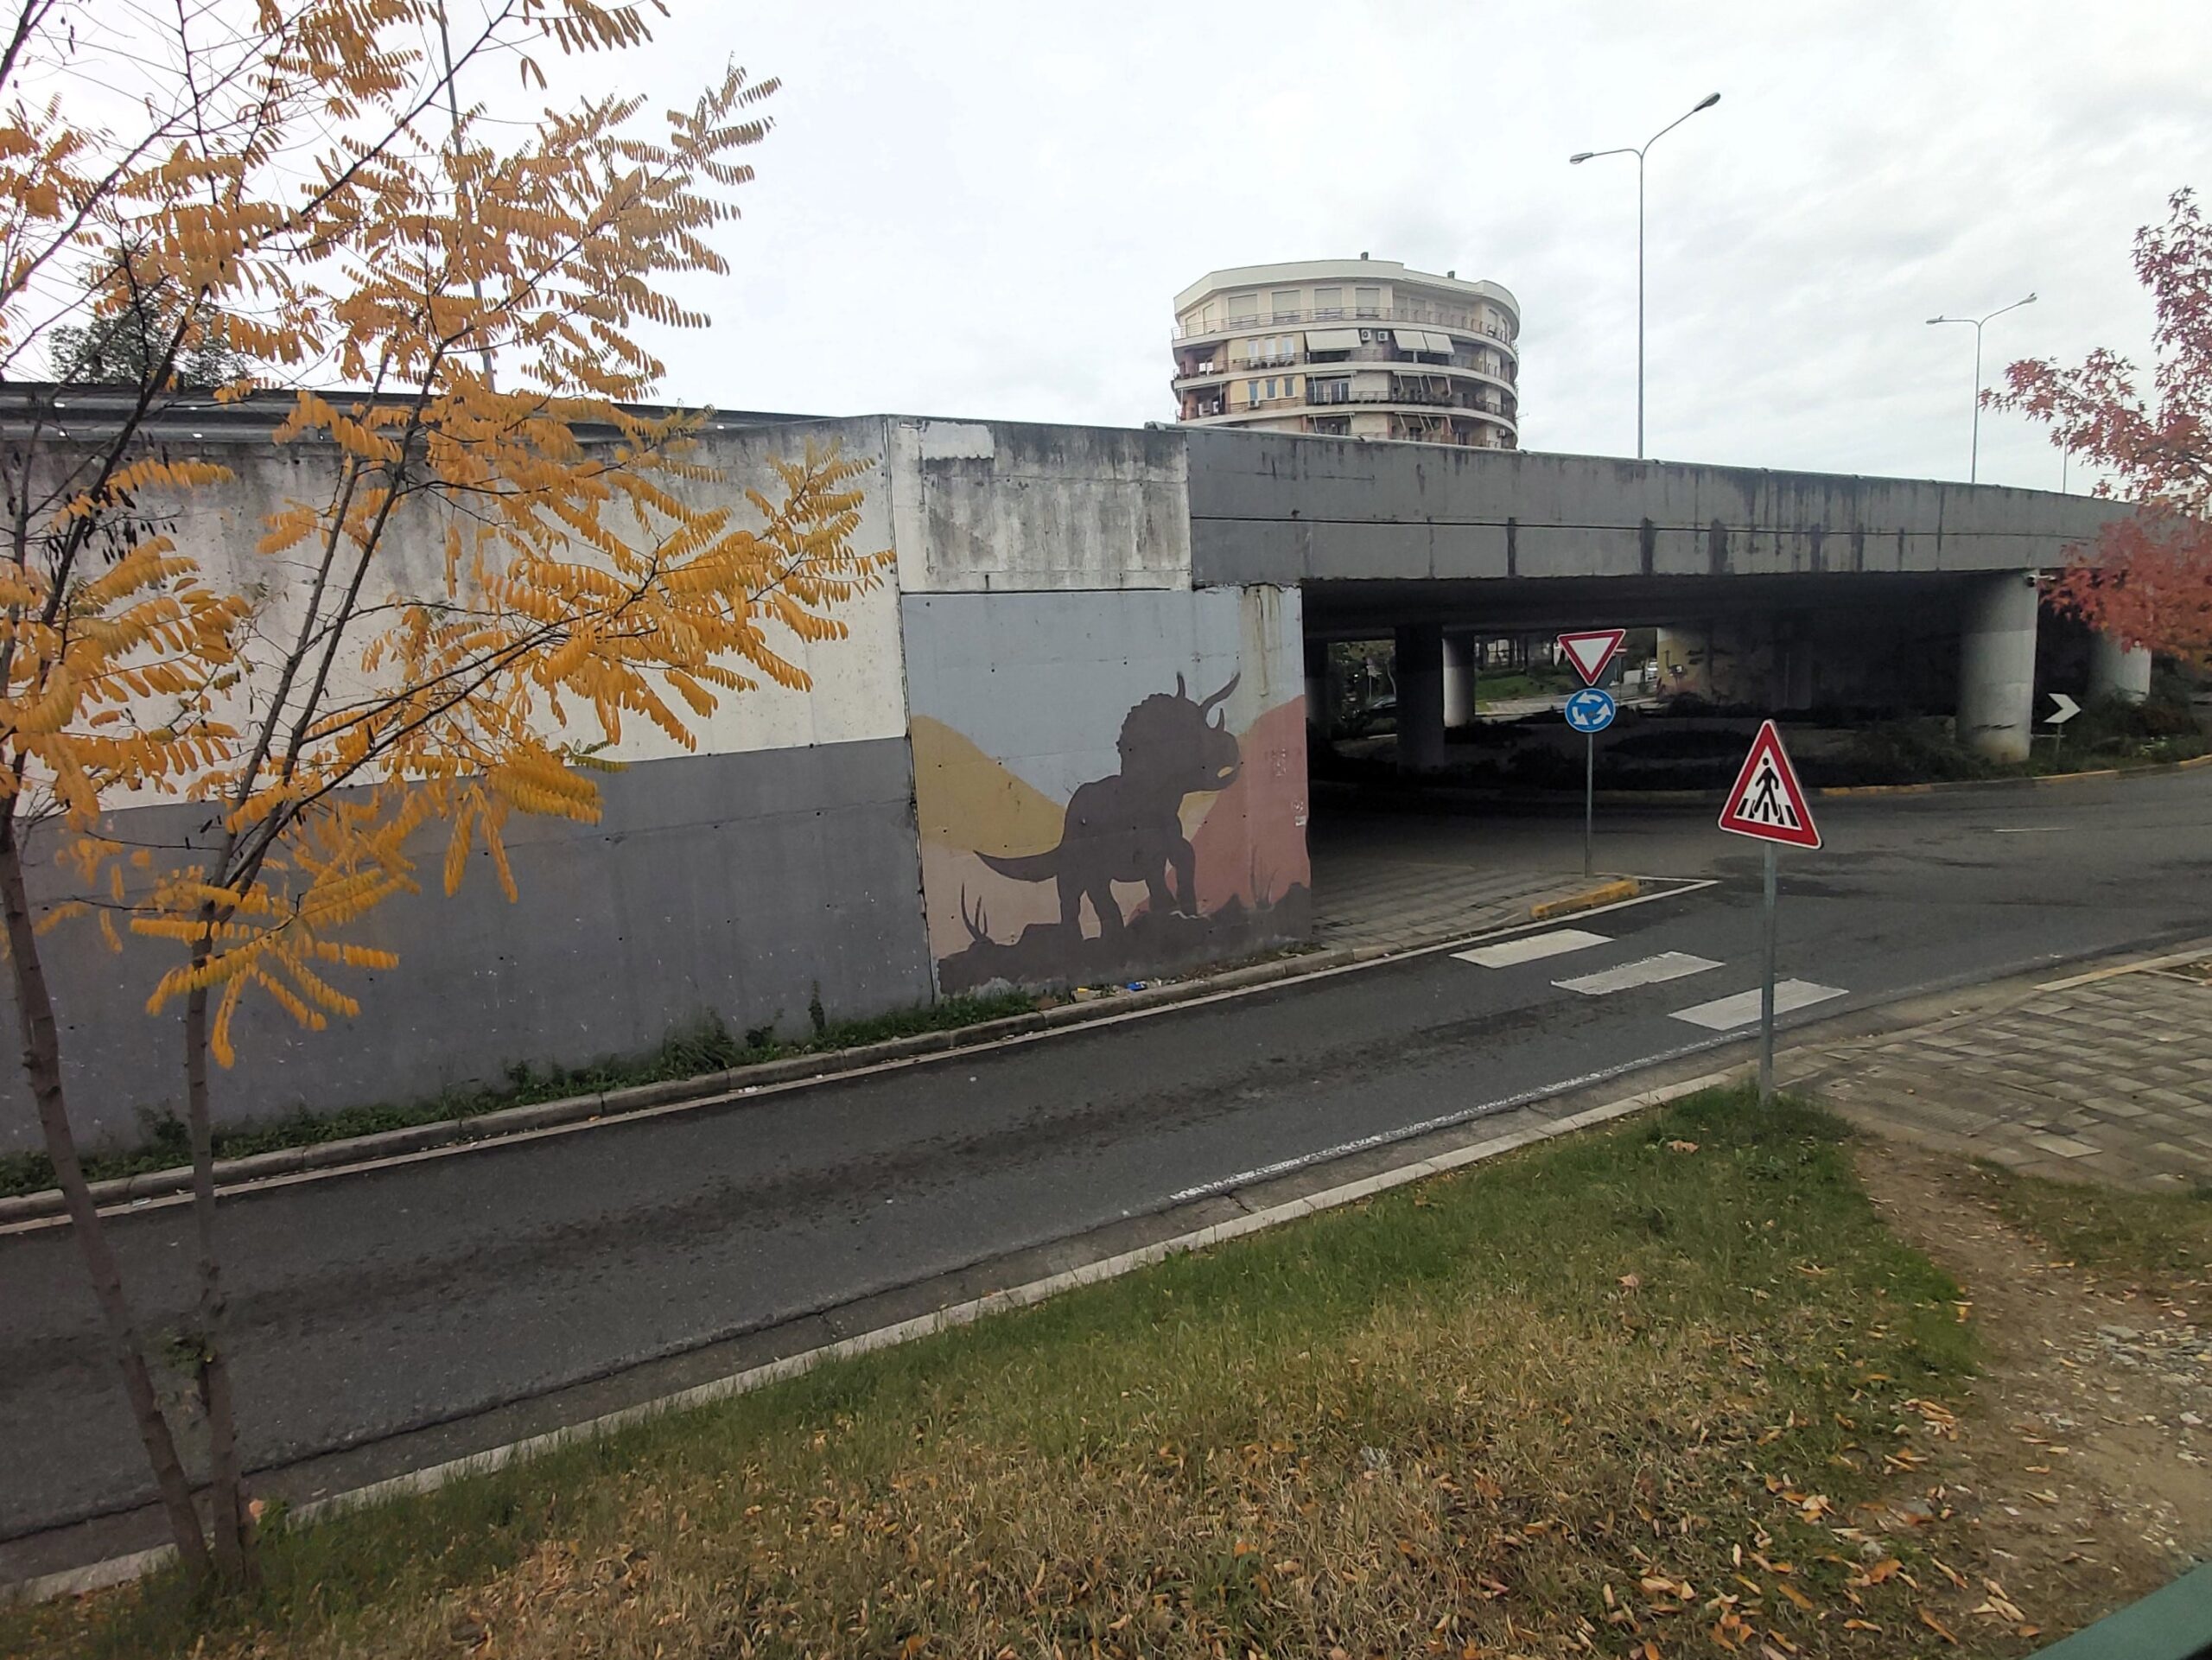 A triceratops mural by an underpass in Tirana, Albania